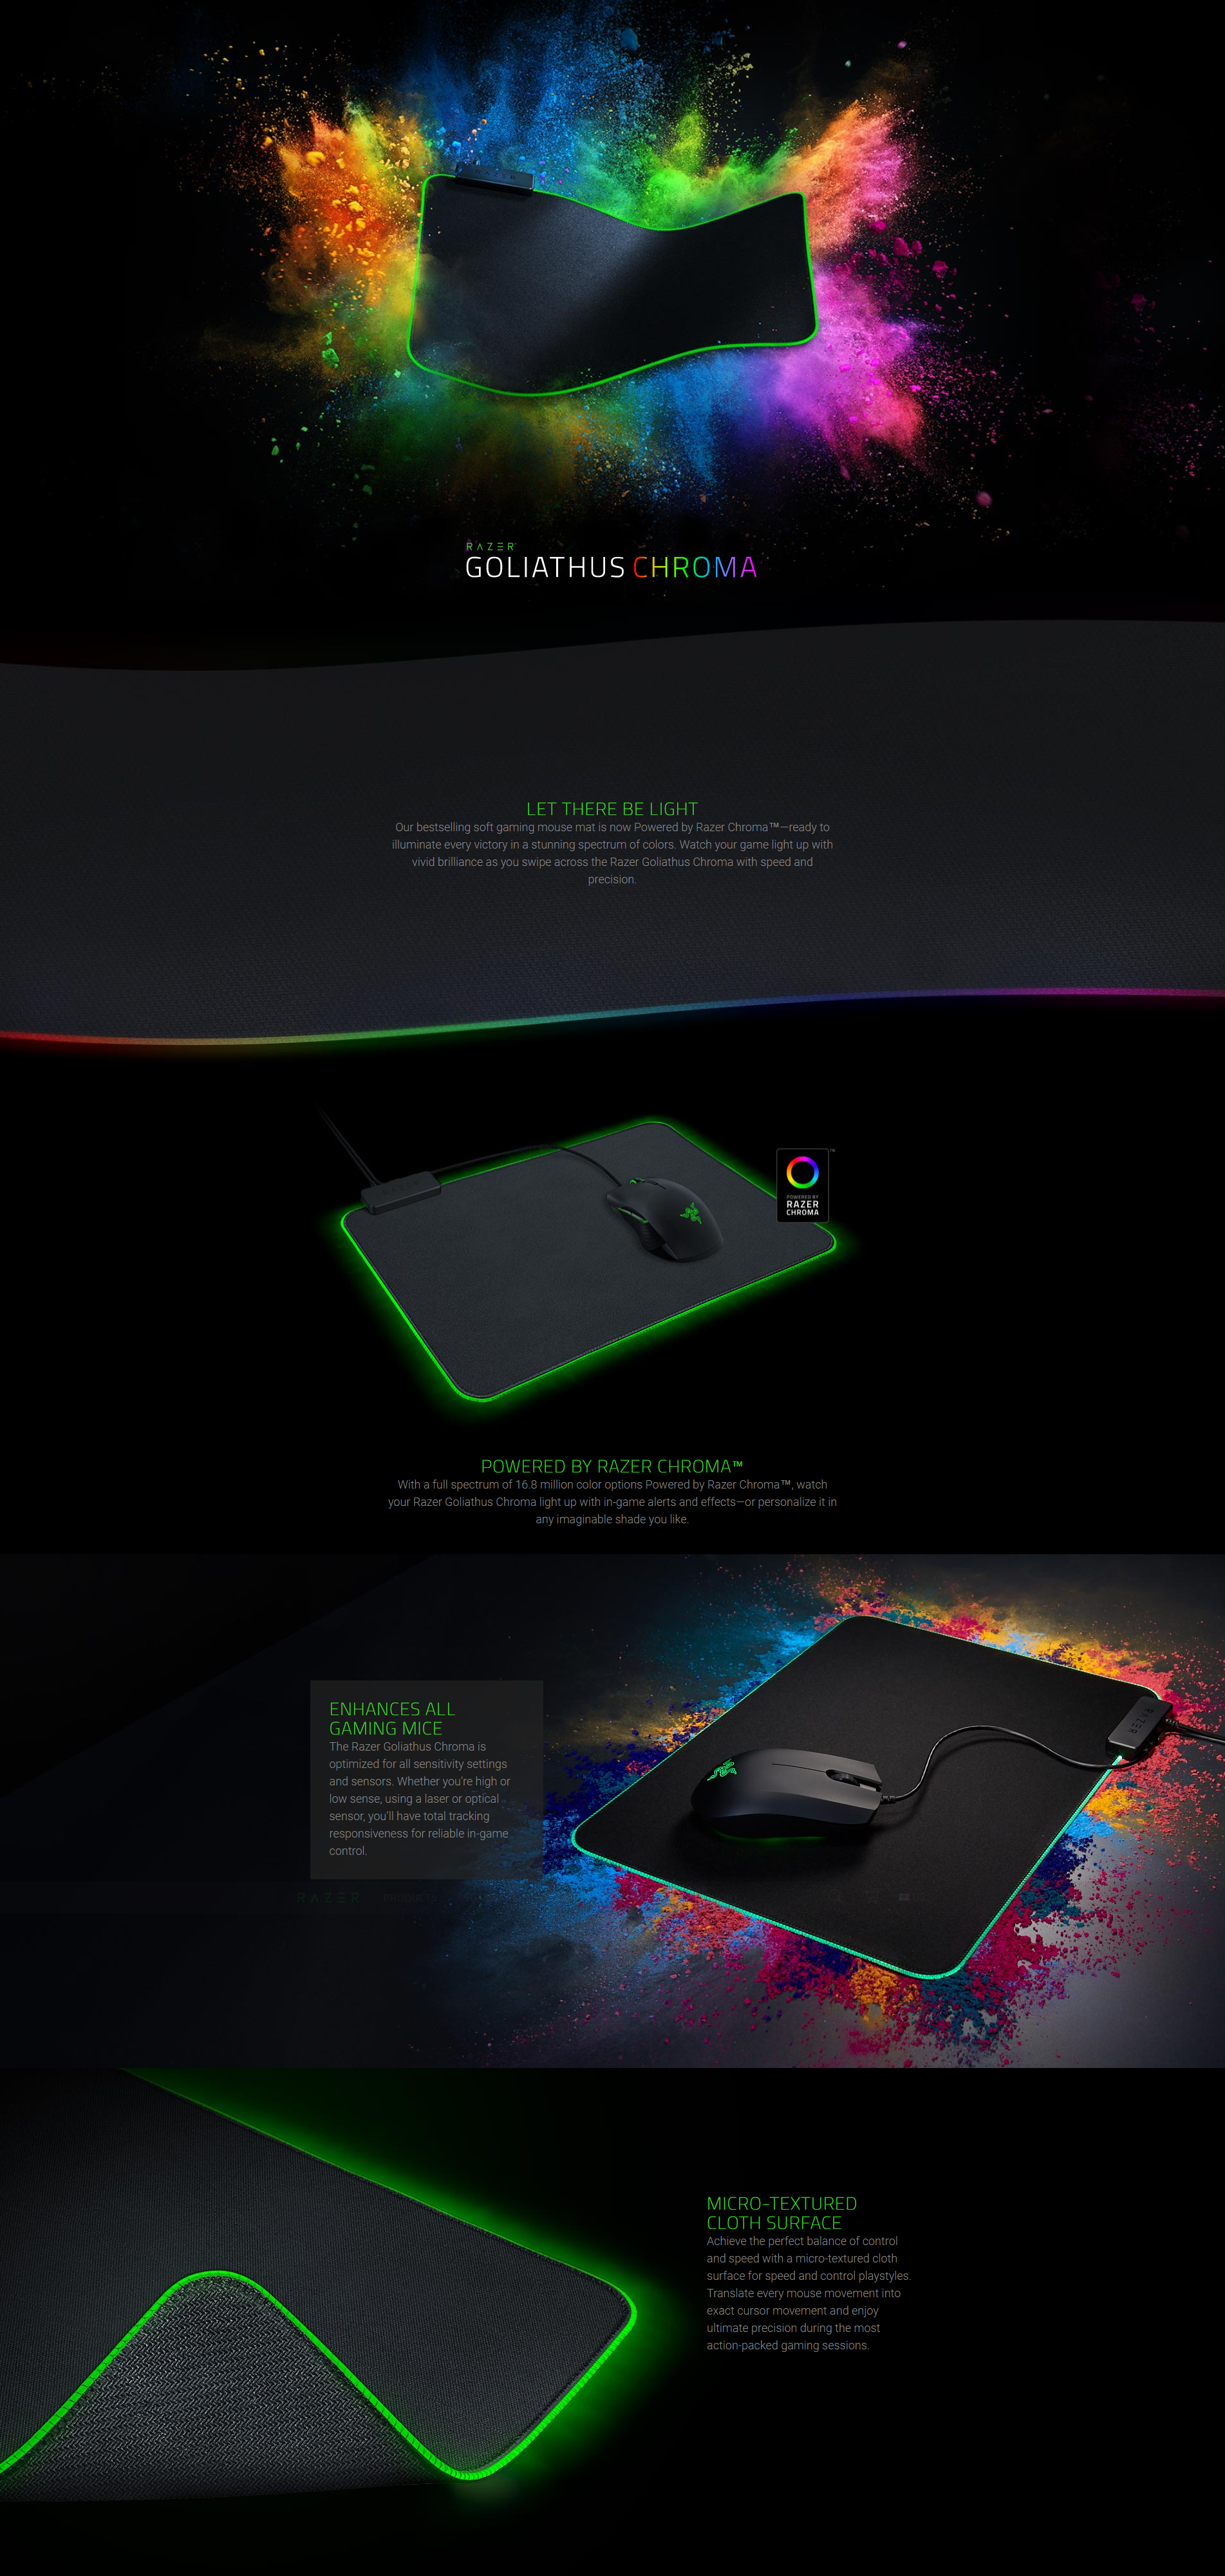 A large marketing image providing additional information about the product Razer Goliathus Chroma RGB Gaming Mousemat - Additional alt info not provided